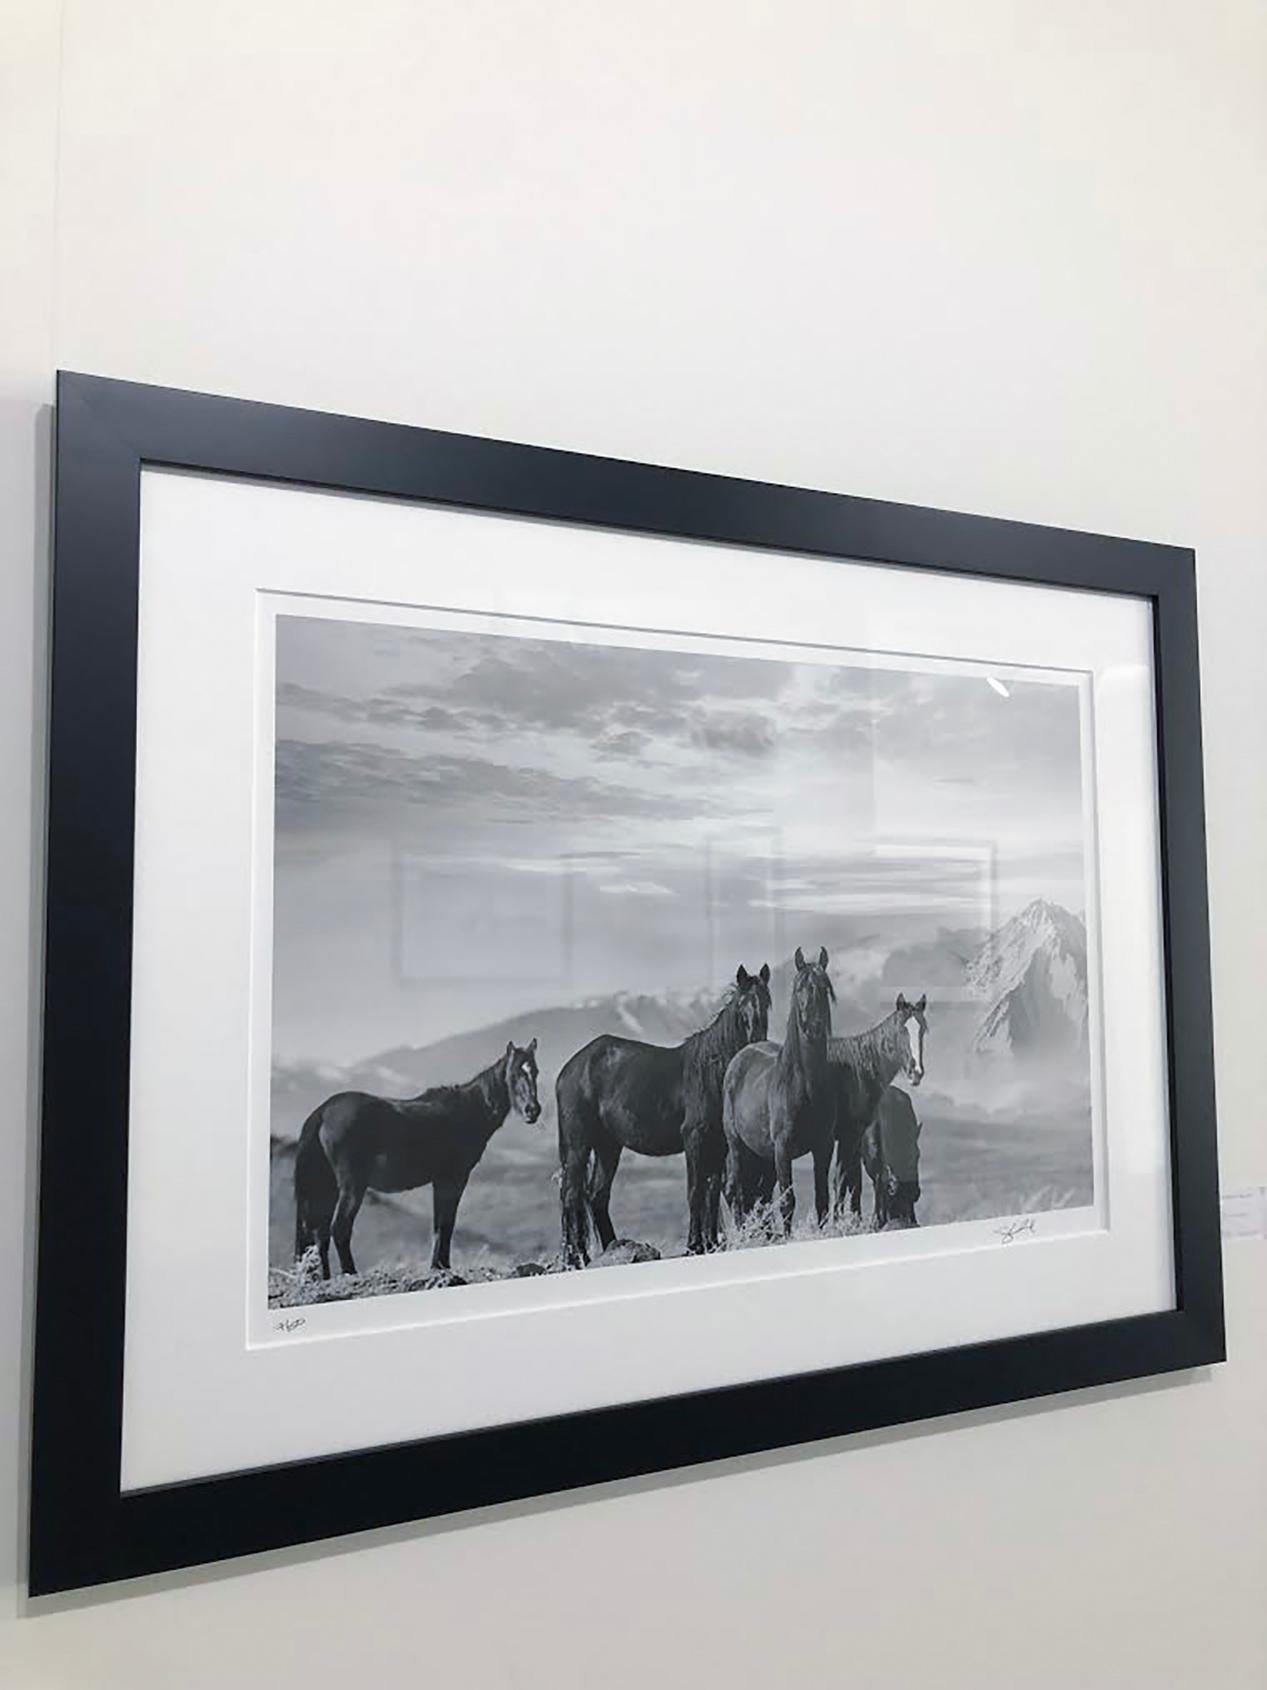 High Sierra Mustangs - 36x24 Black and White Photography of Wild Horses  1